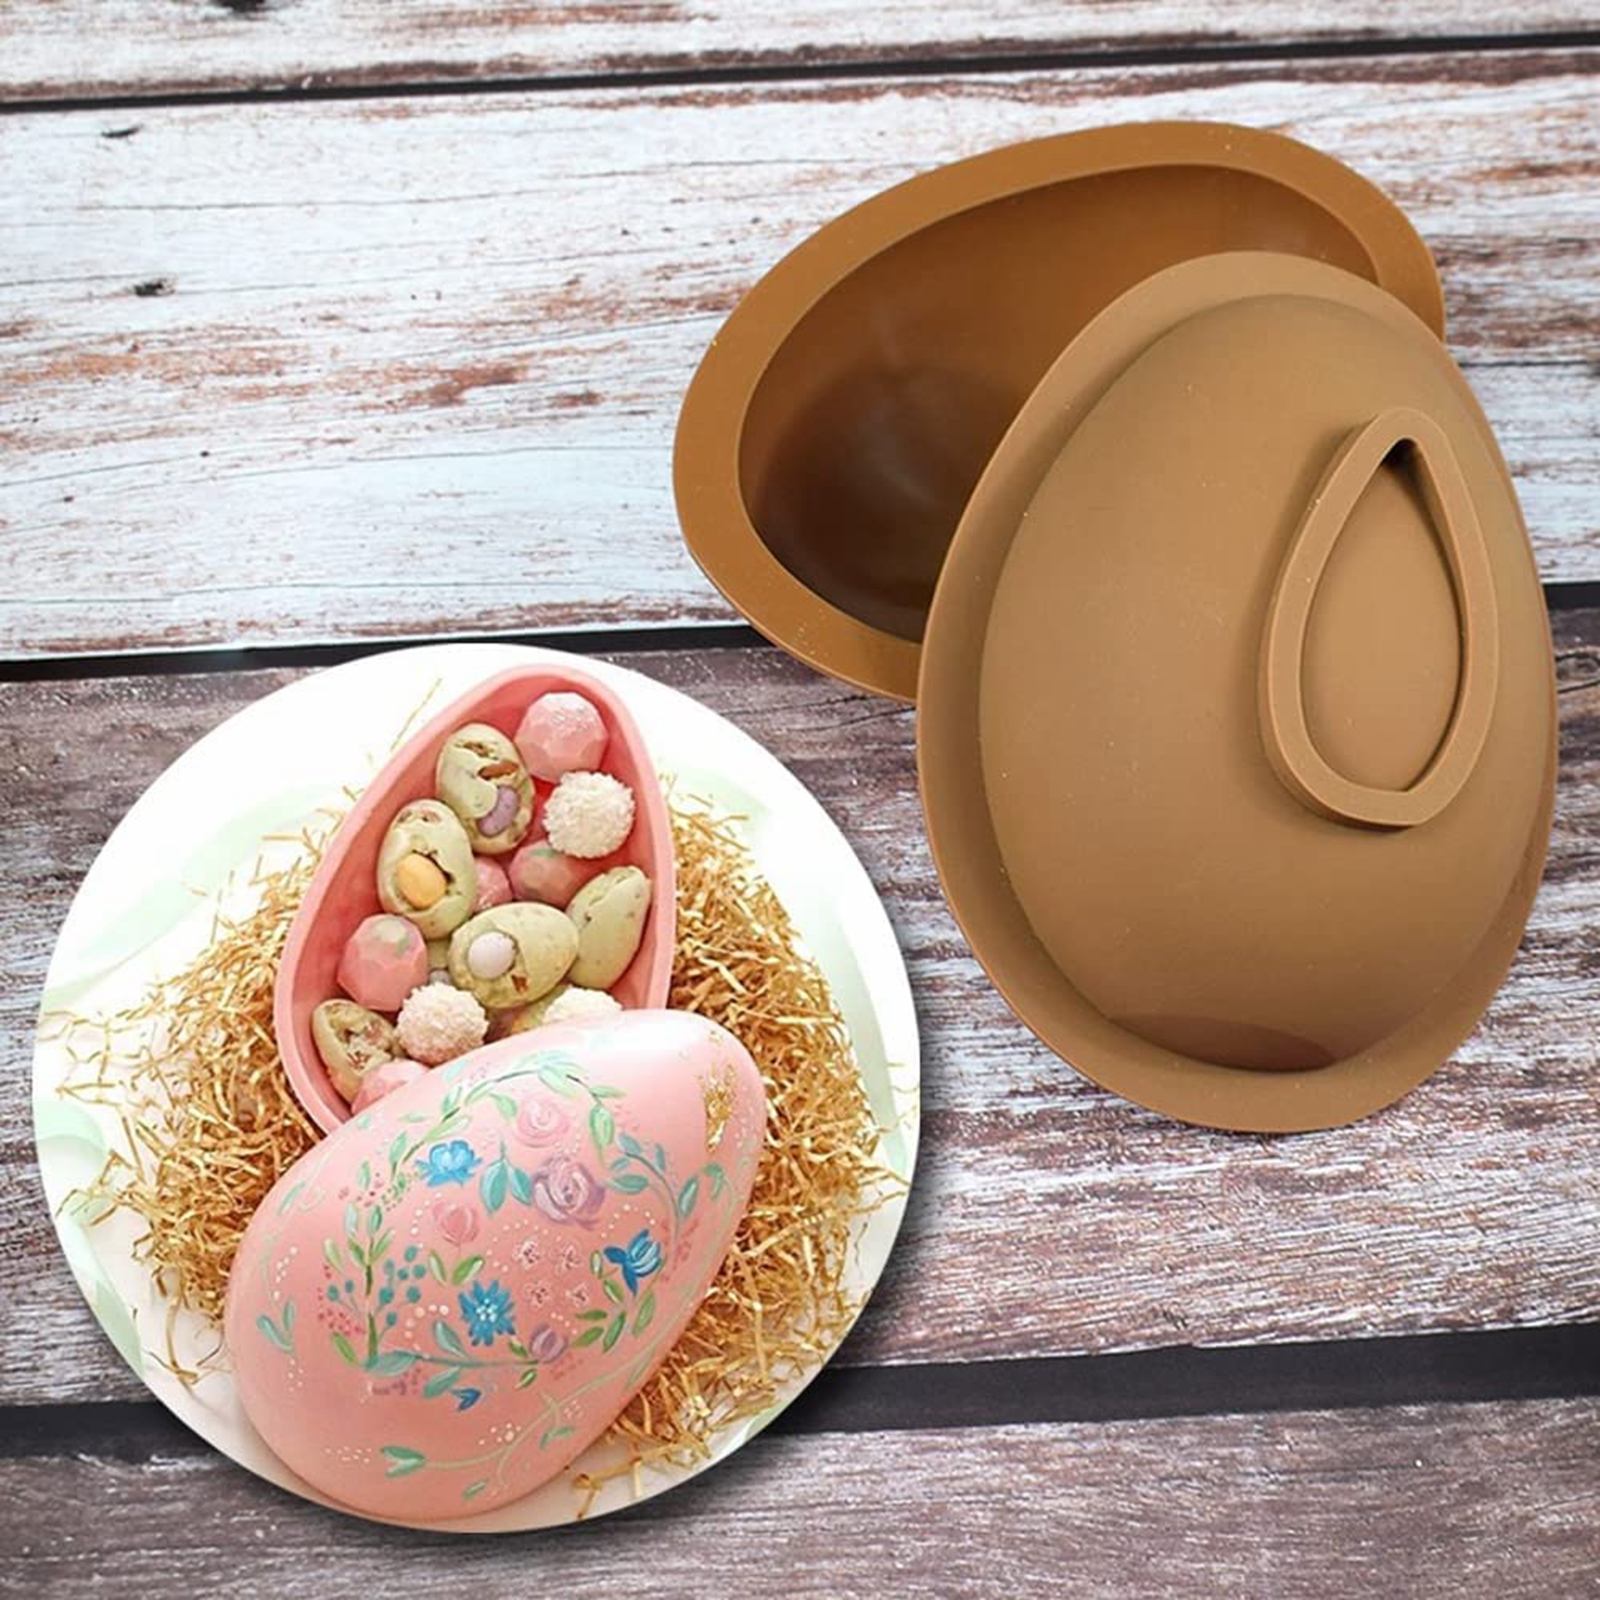 EASTER EGG Silicone Mold